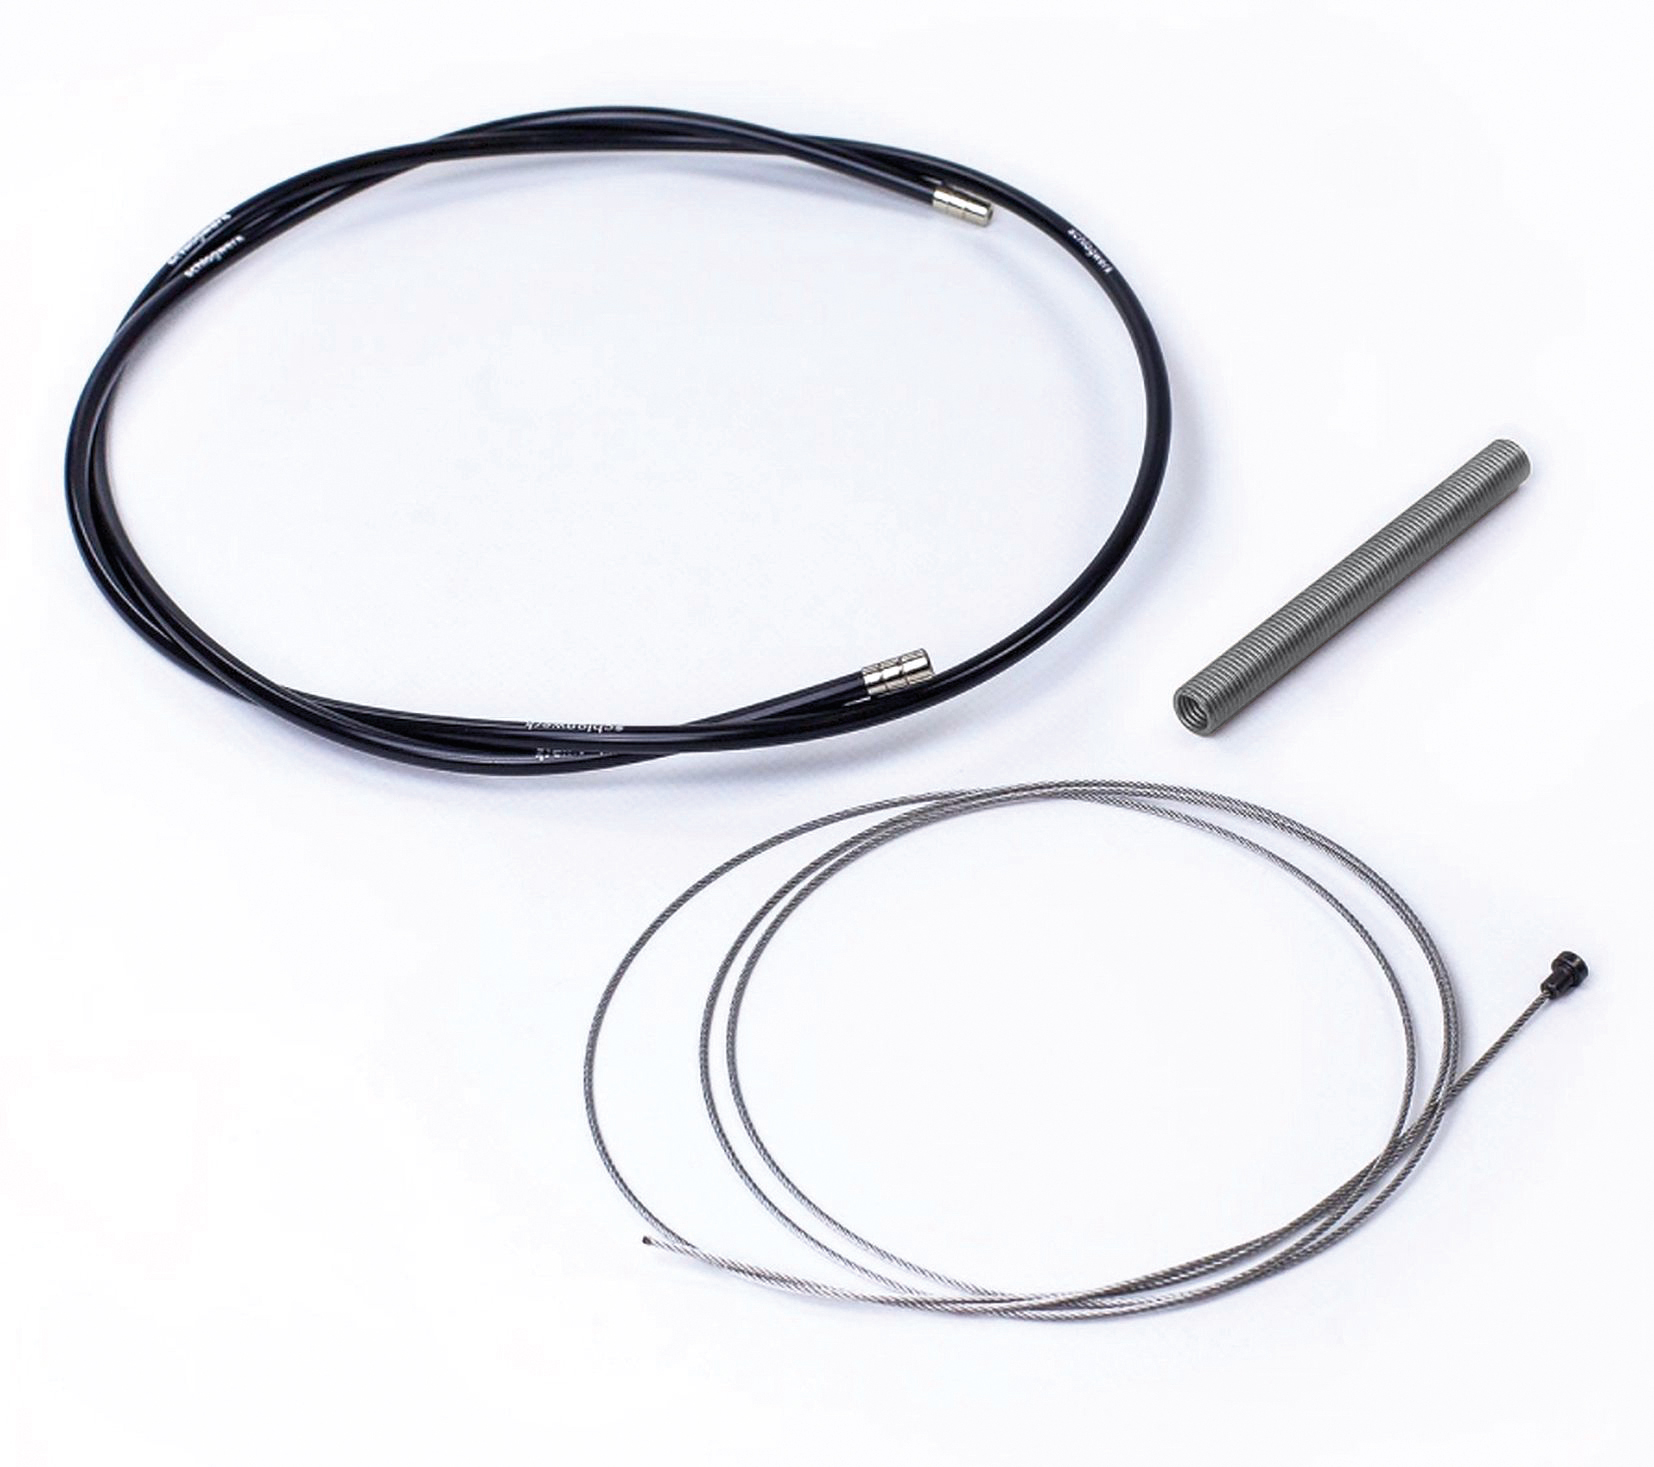 The pull cable 278-U-04/04 from RINGSPANN RCS